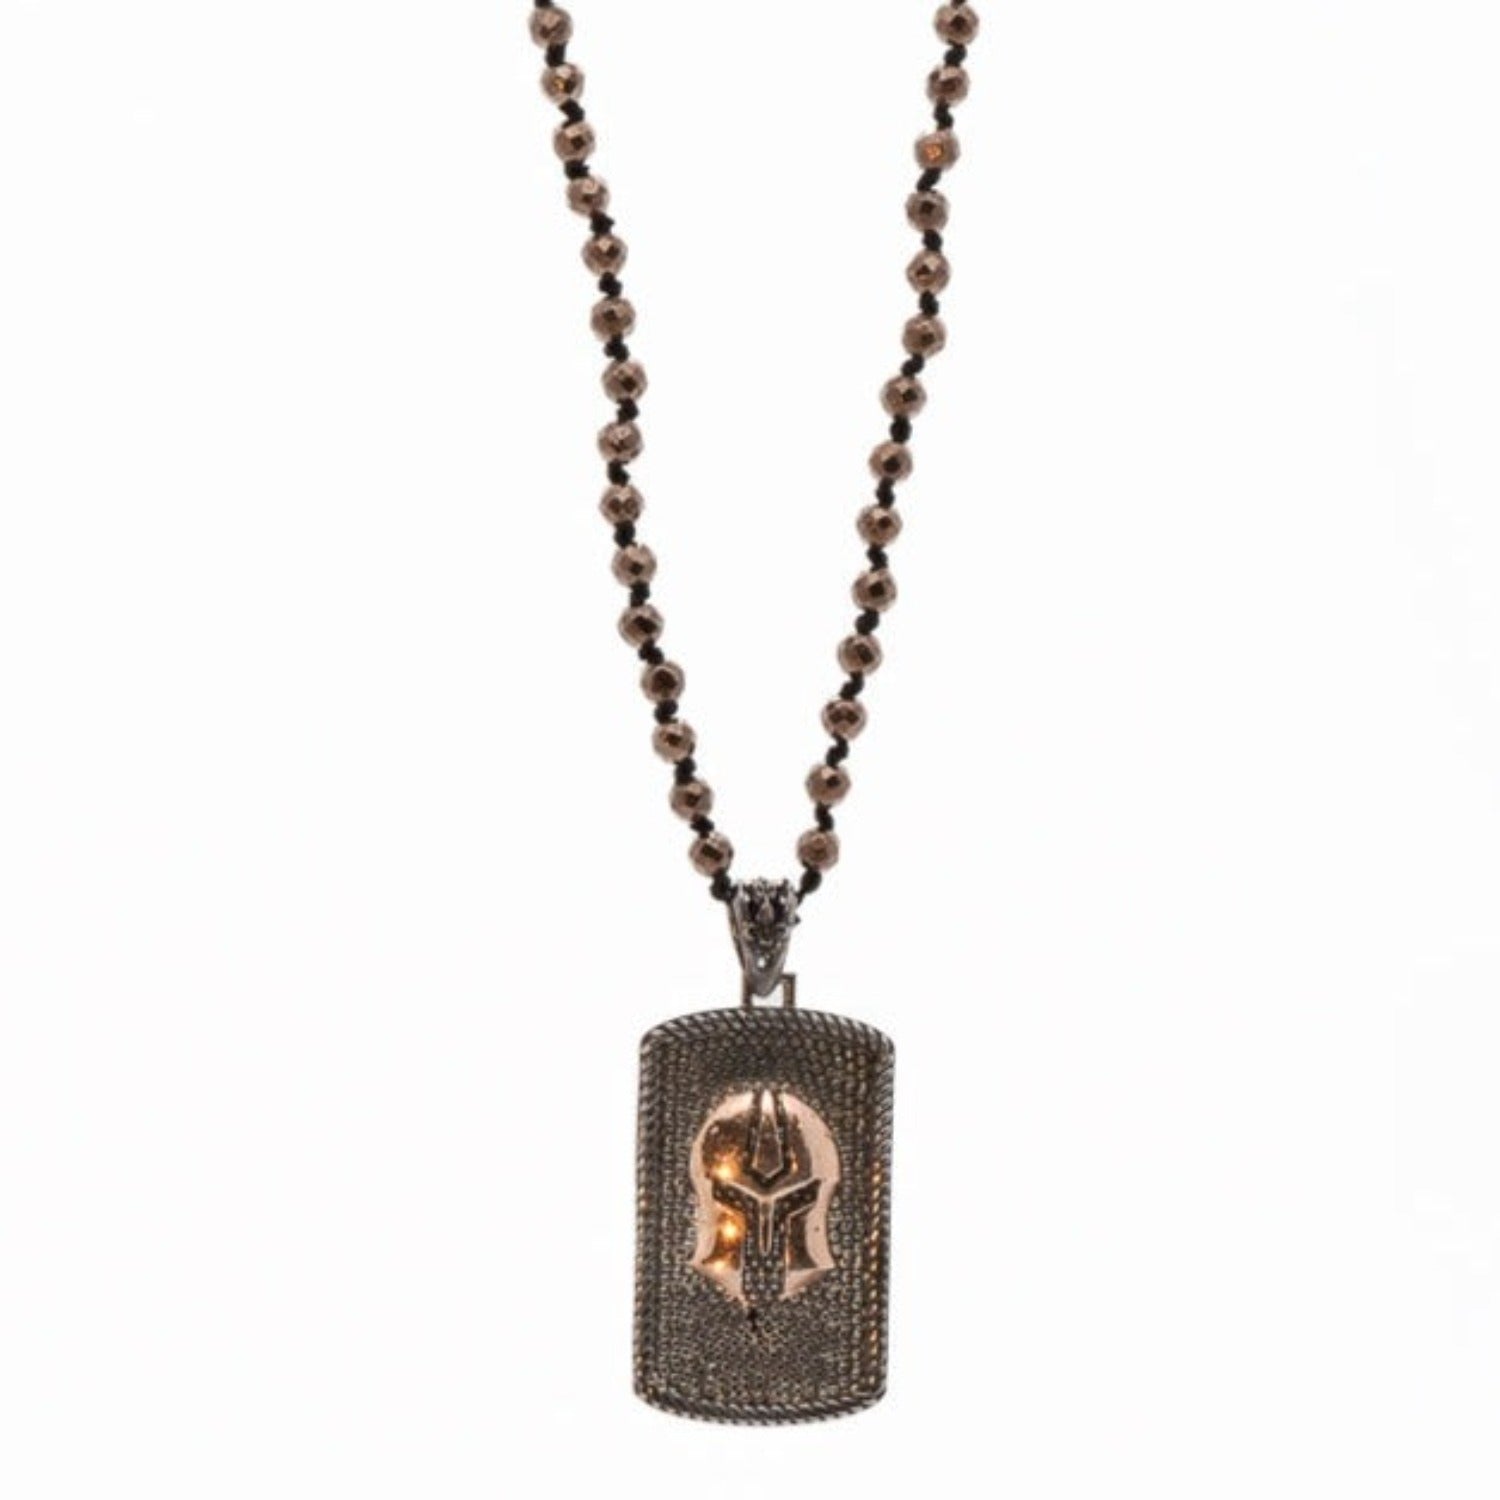 A bold and stylish men's necklace with gladiator pendant